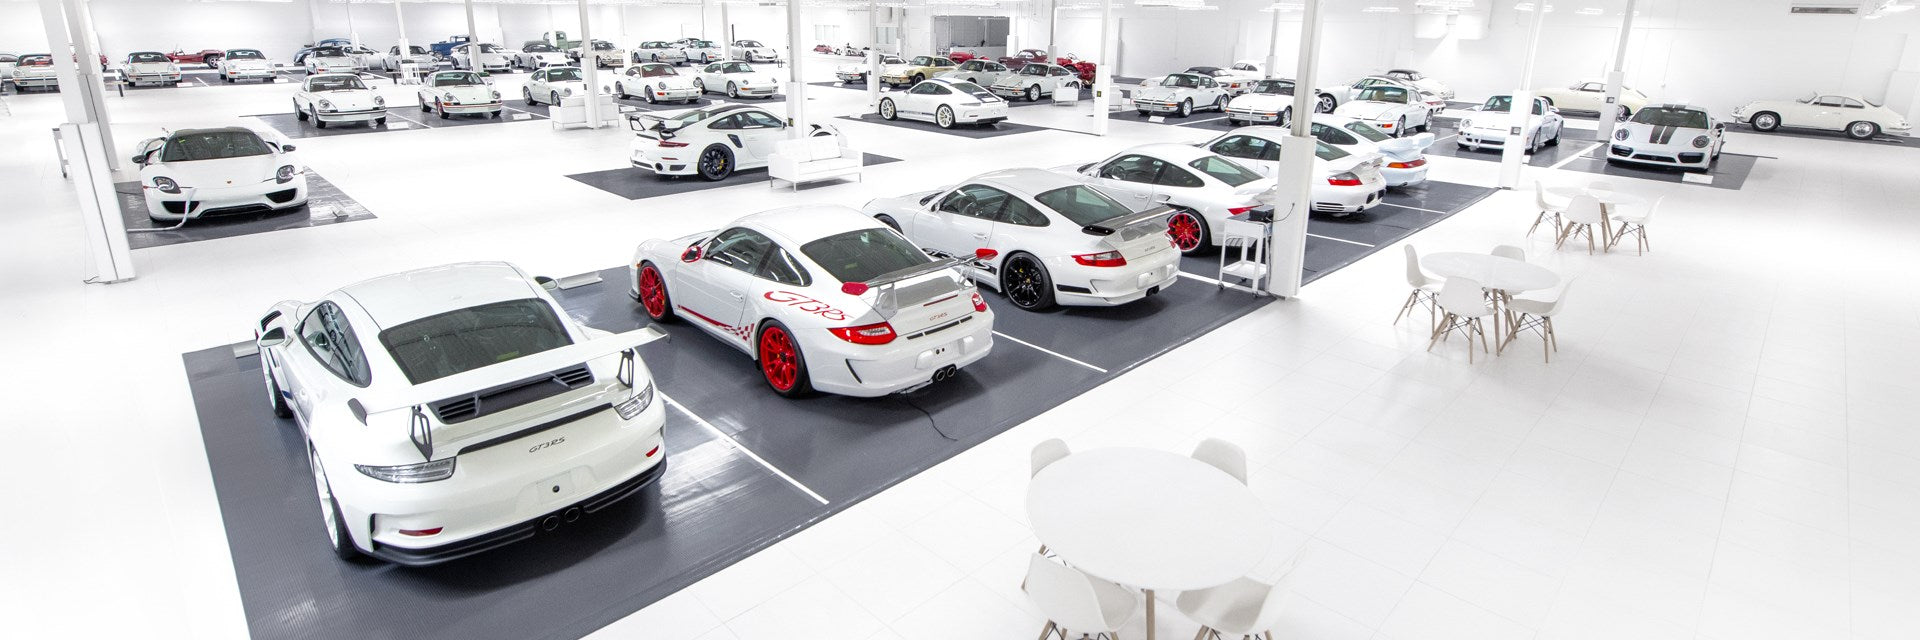 Rare Collection Of 56 White Porsches Is Heading To Auction